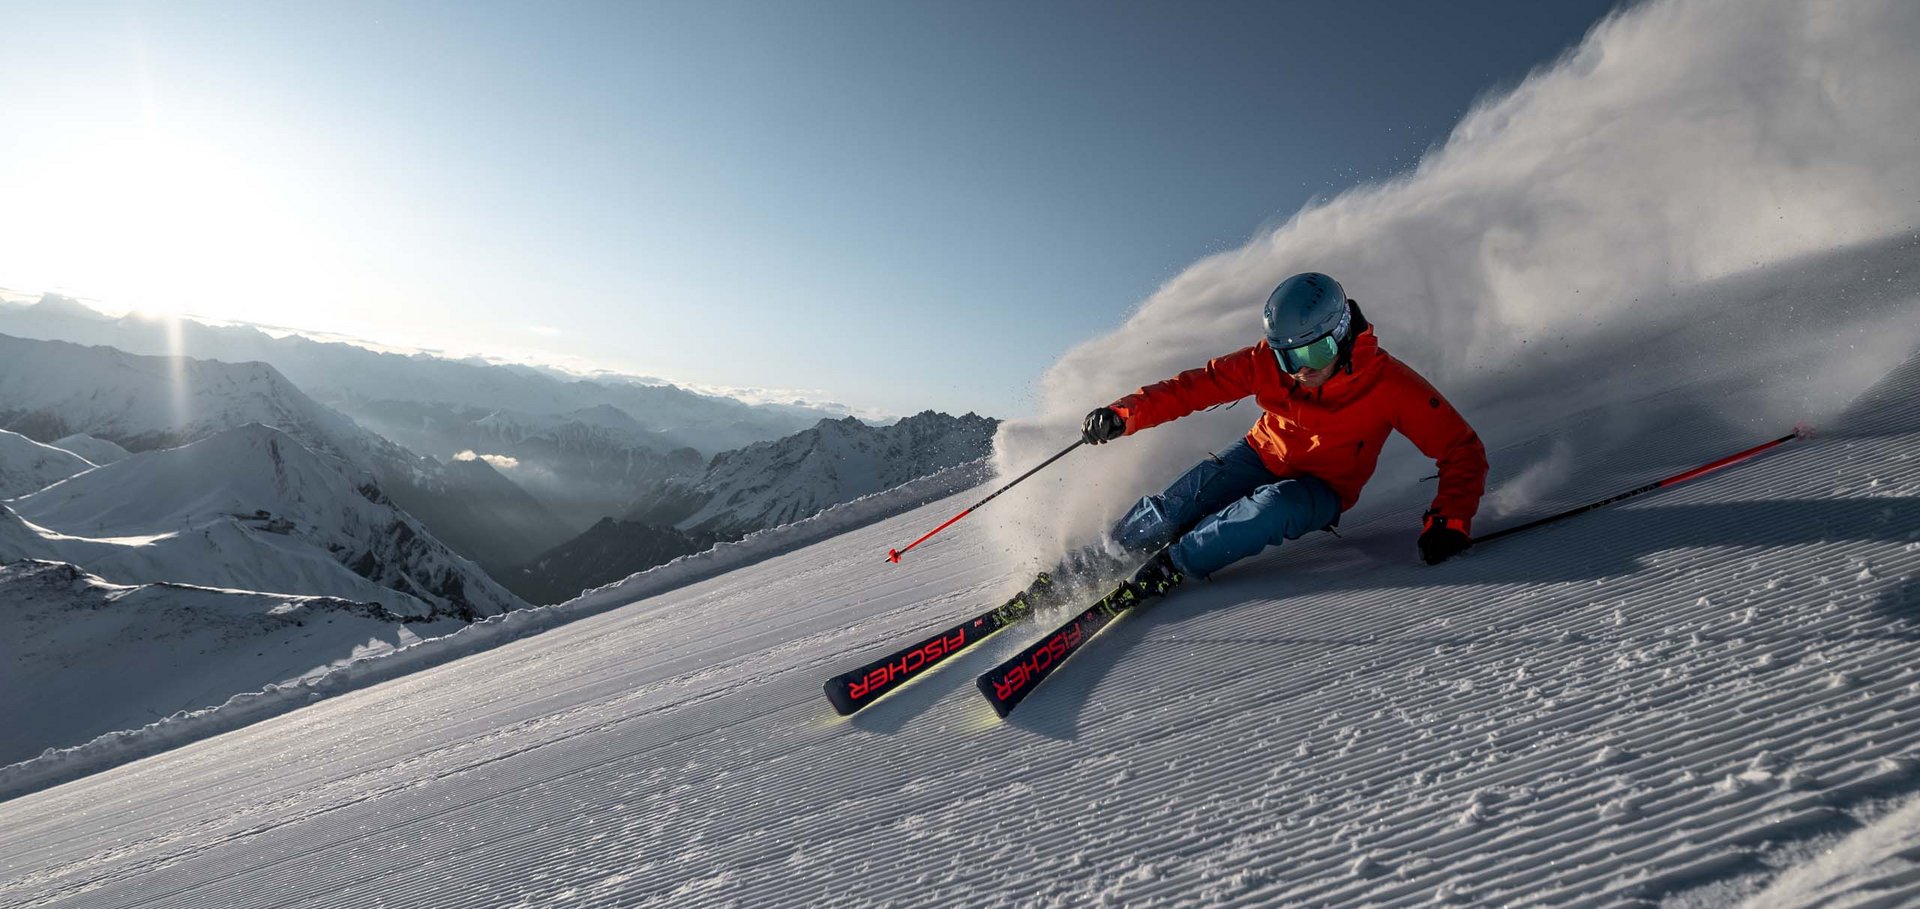 Hotel Seespitz: Ski holidays in Ischgl and much more besides